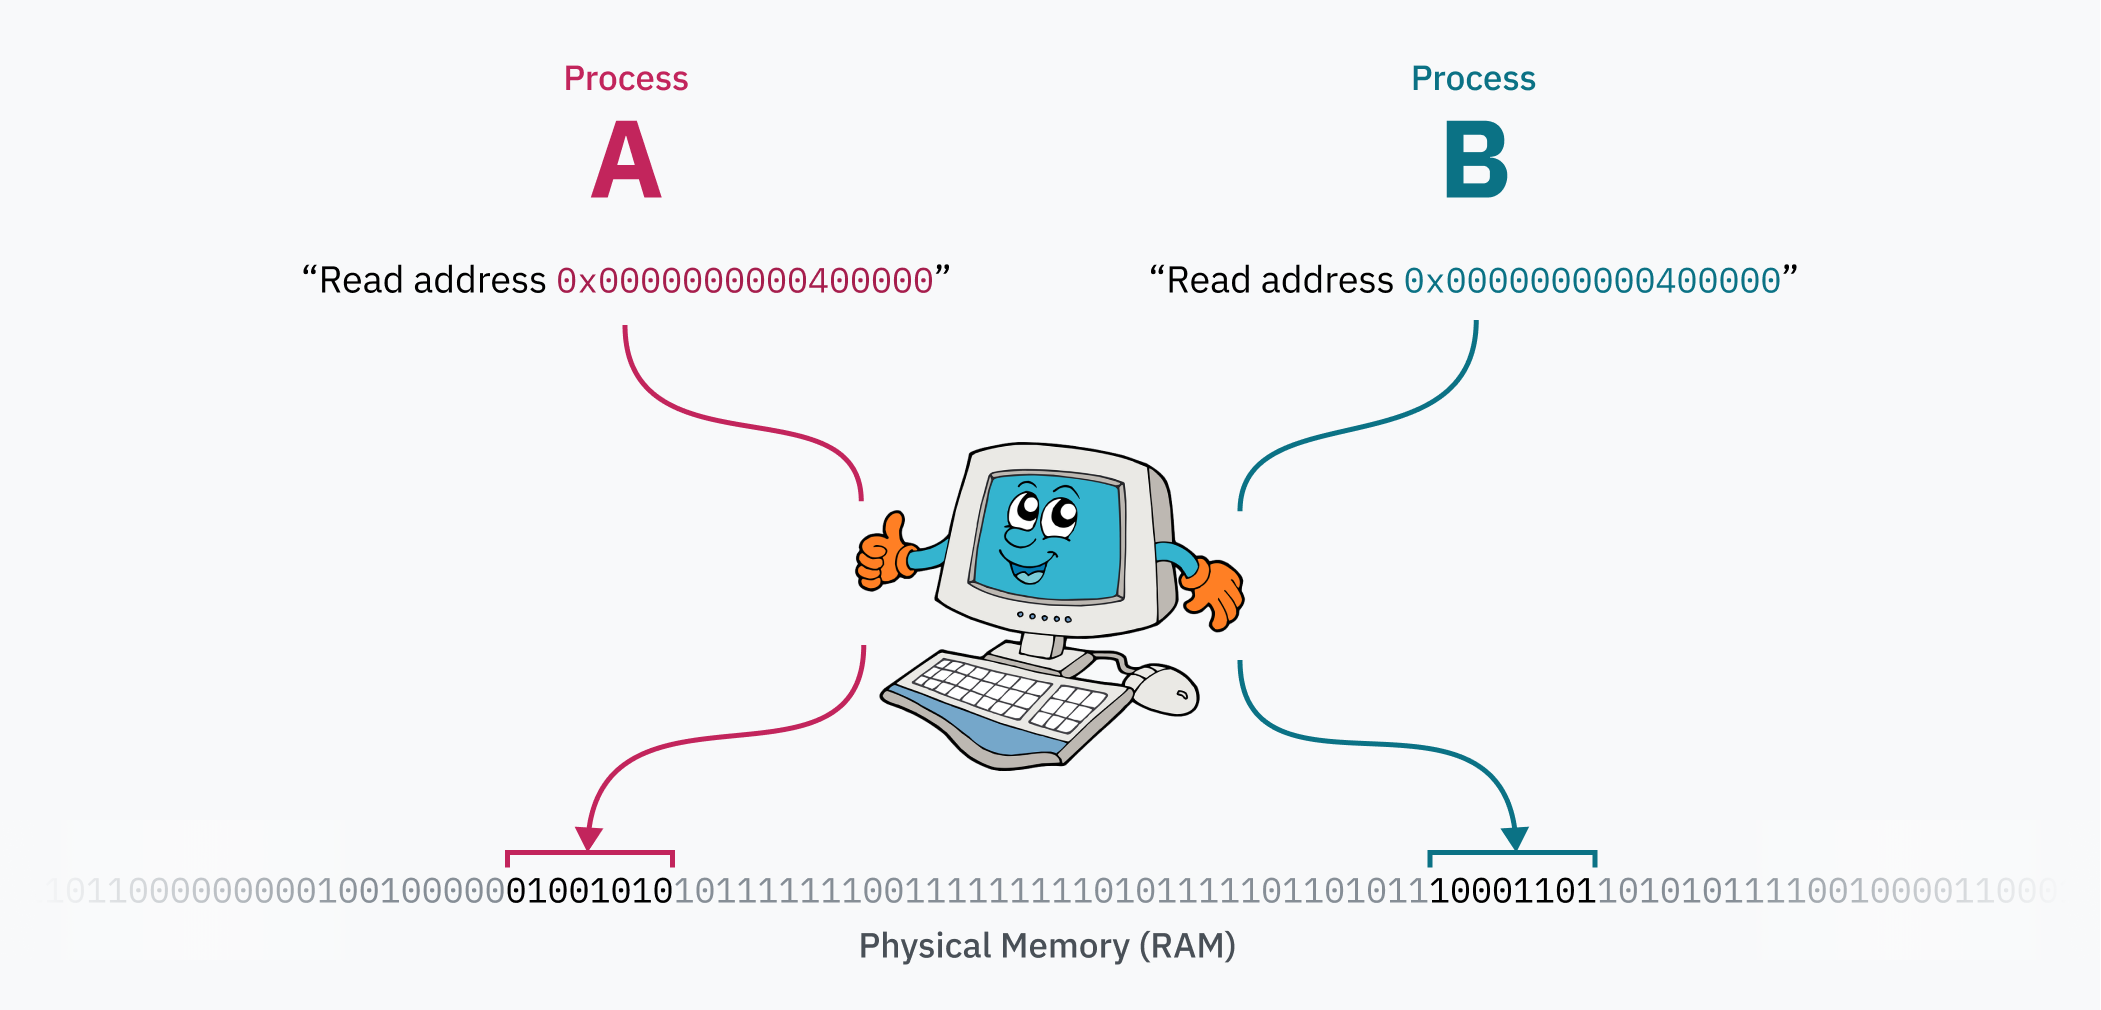 A diagram showing two different processes asking a cheesy clip art image of an anthropomorphic desktop computer to translate the same memory address. The anthropomorphic computer responds to each process with a different section from within the continuous strip of physical memory.